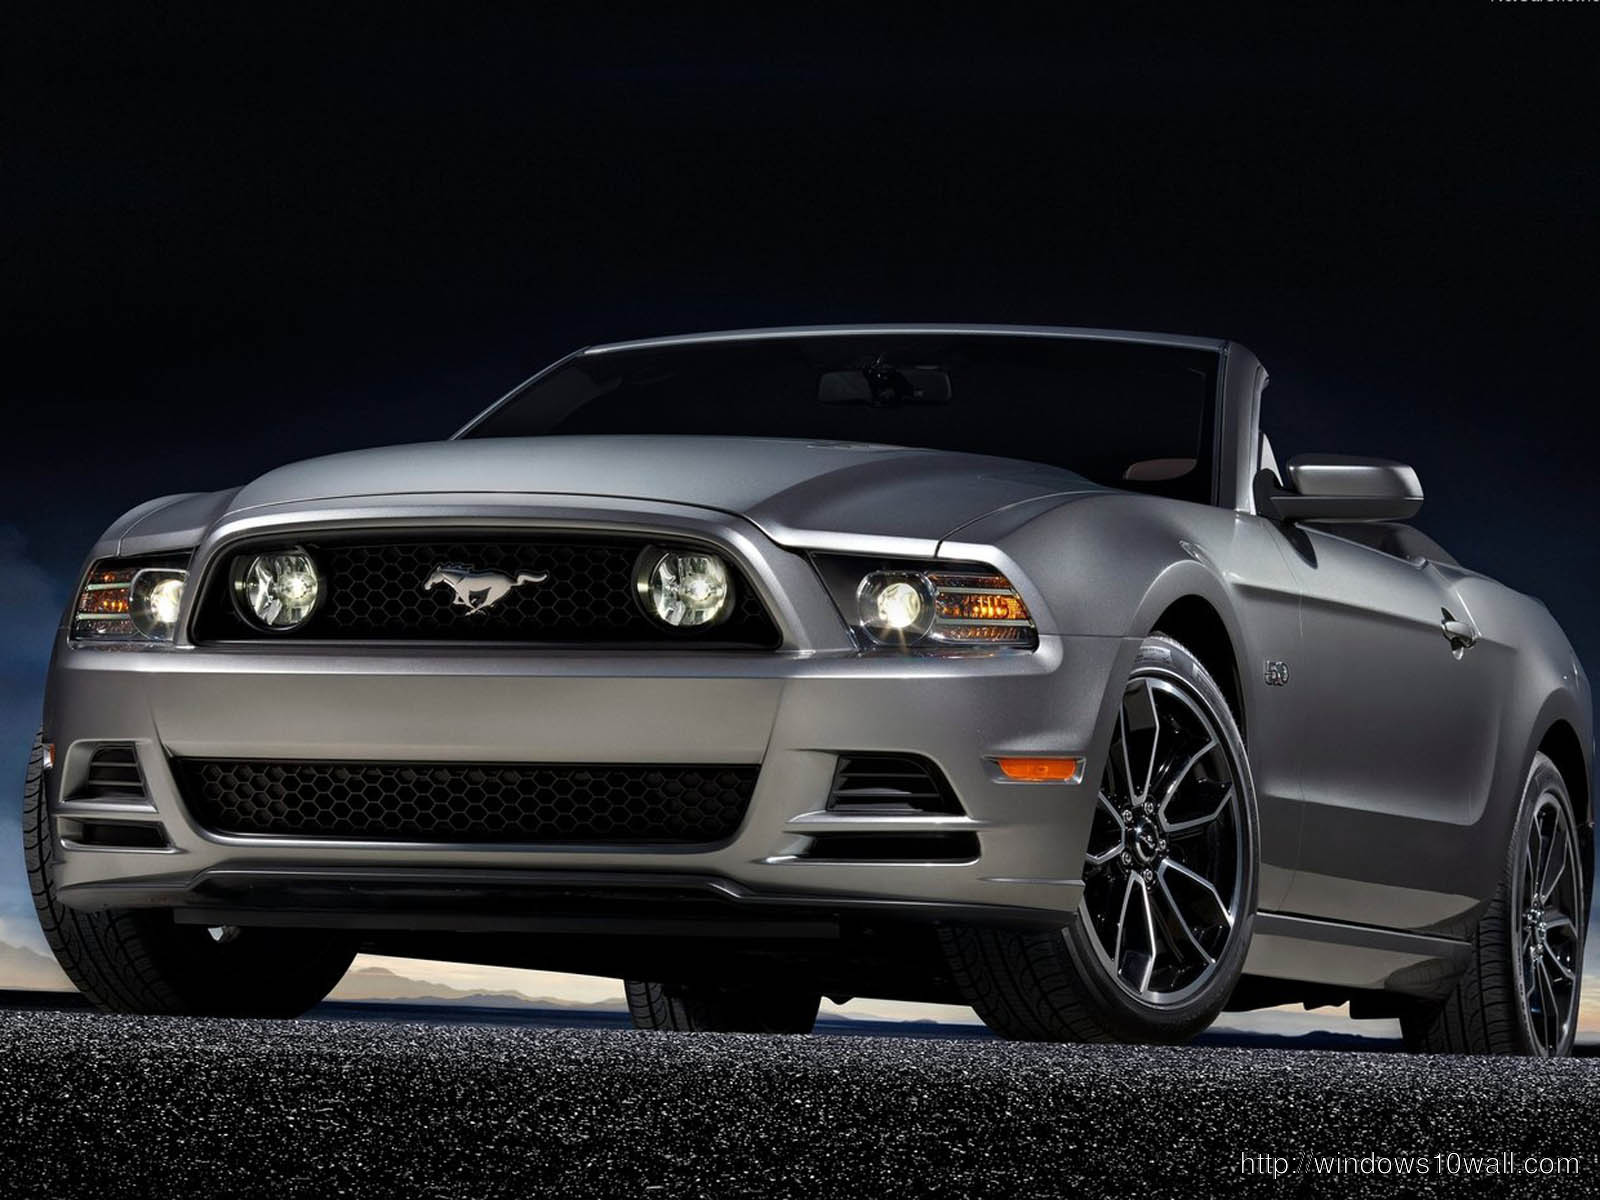 Grey Ford Mustang GT 2013 Background Wallpaper